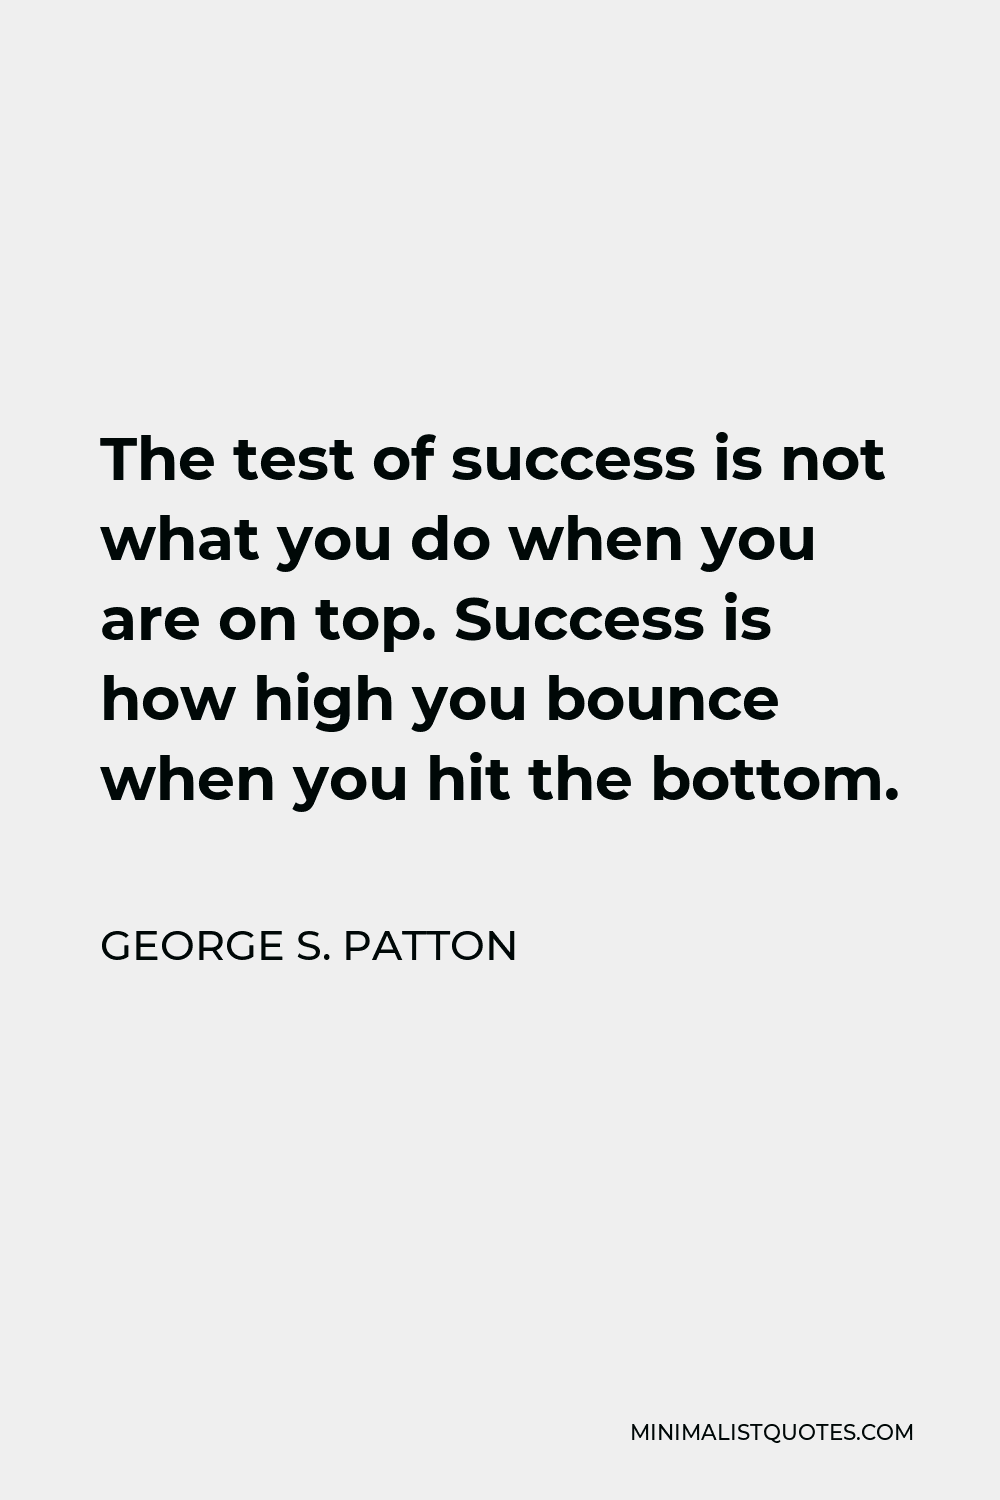 George S. Patton Quote - The test of success is not what you do when you are on top. Success is how high you bounce when you hit the bottom.